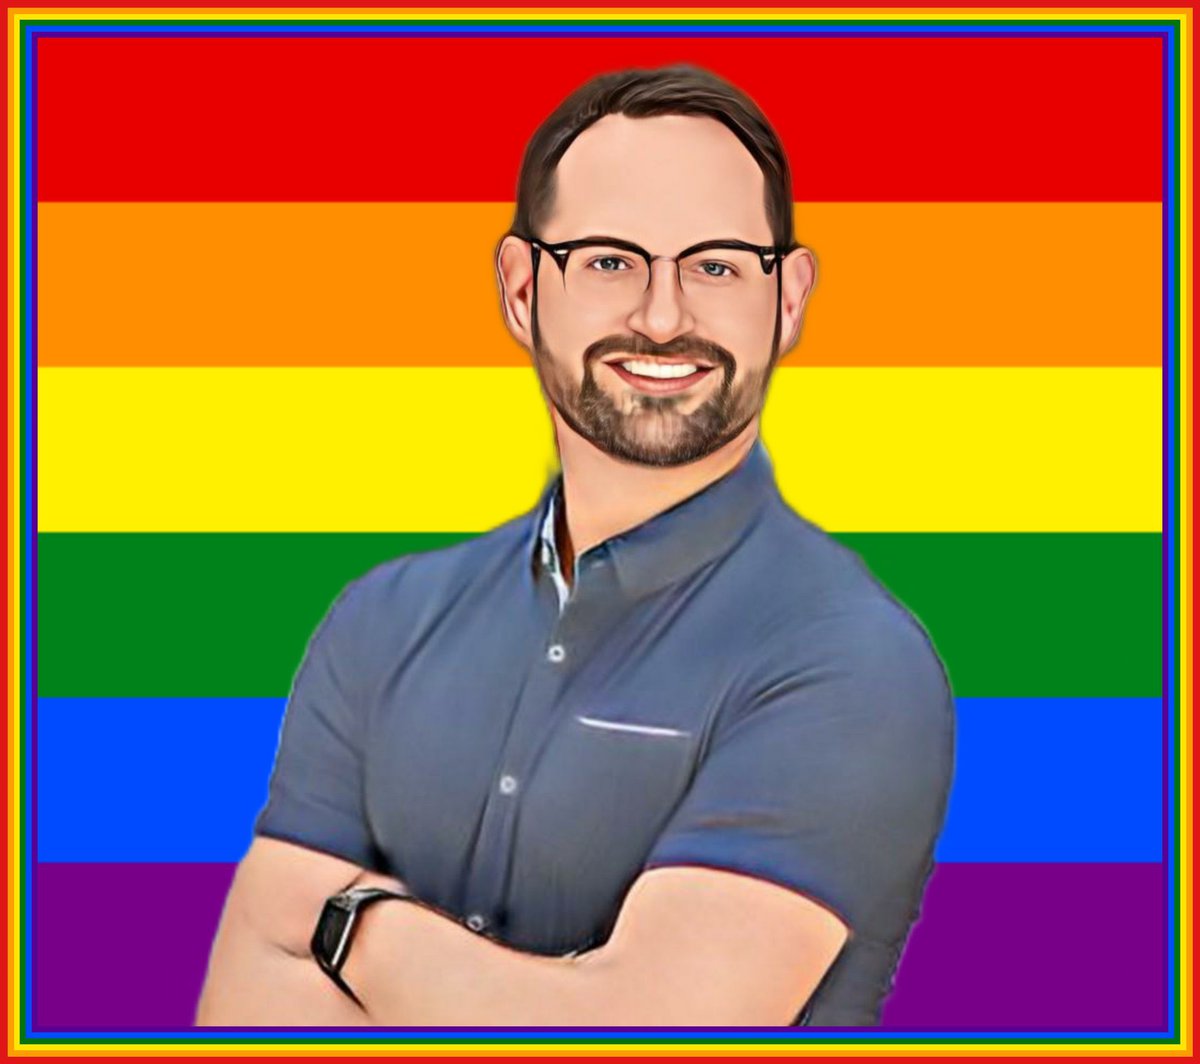 Thank you @BBArtiste for this amazing #OutAndProud artistic photo! 

This is a fun way to continue celebrating my authentic self and improving #LGBTQinHealthcare representation!

@LGBTQIAnesth @GLMA_LGBTHealth @PediAnesthesia @ASALifeline @StanfordODME @stanfordanes @CSAHQ